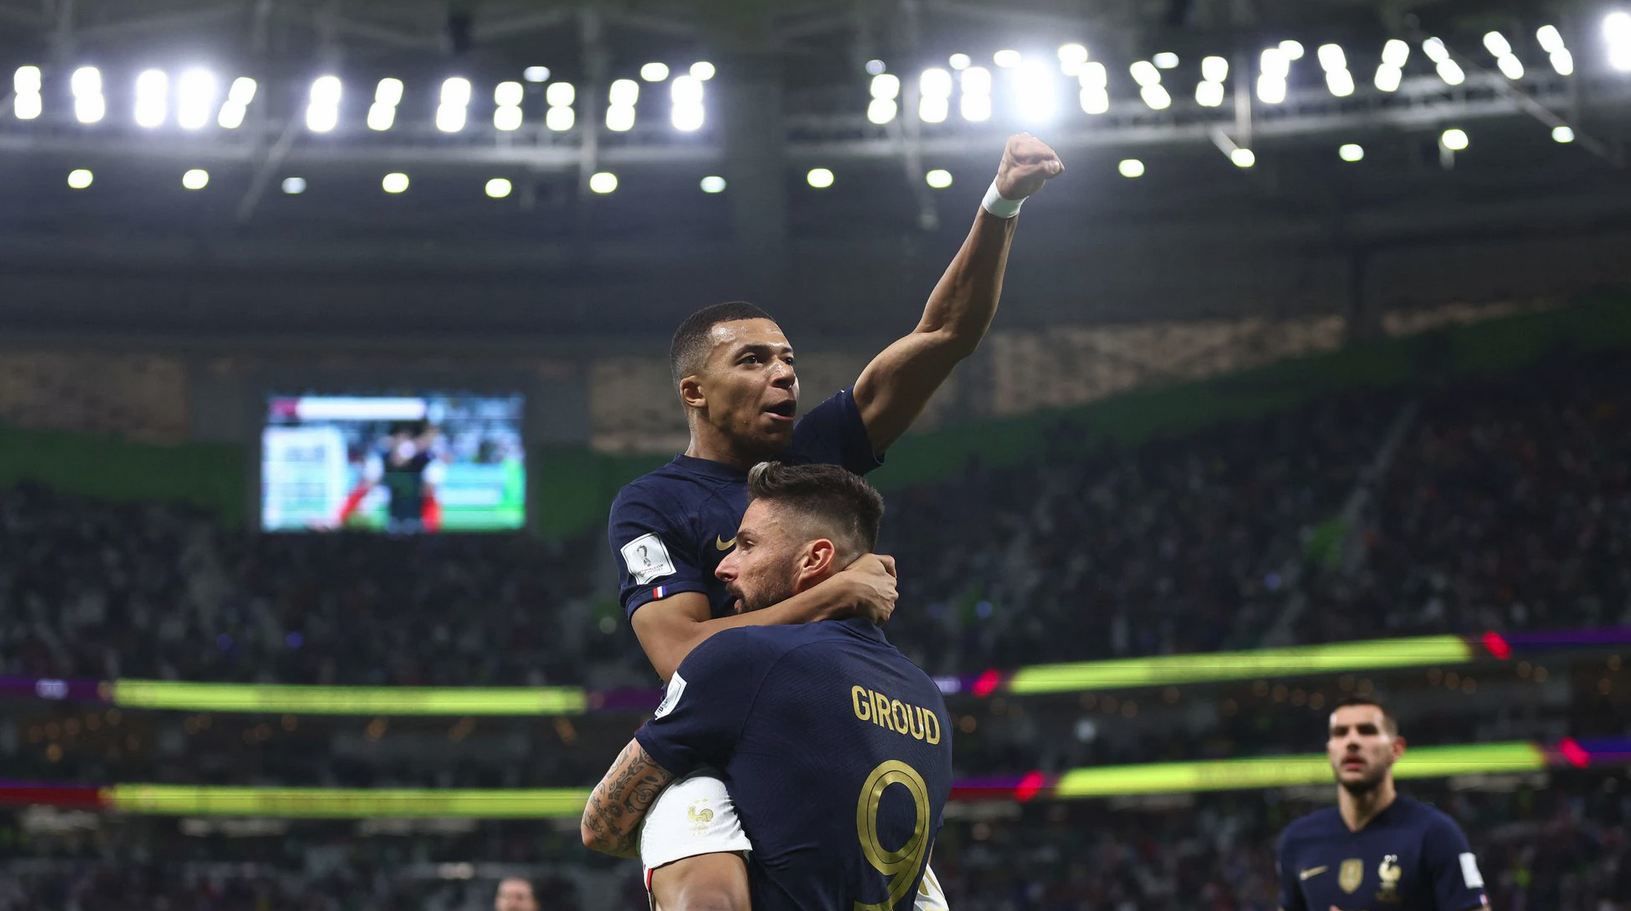 France defeats Poland 3-1 thanks to goals by Giroud and Mbappé to reach the quarterfinals of the 2022 World Cup in Qatar